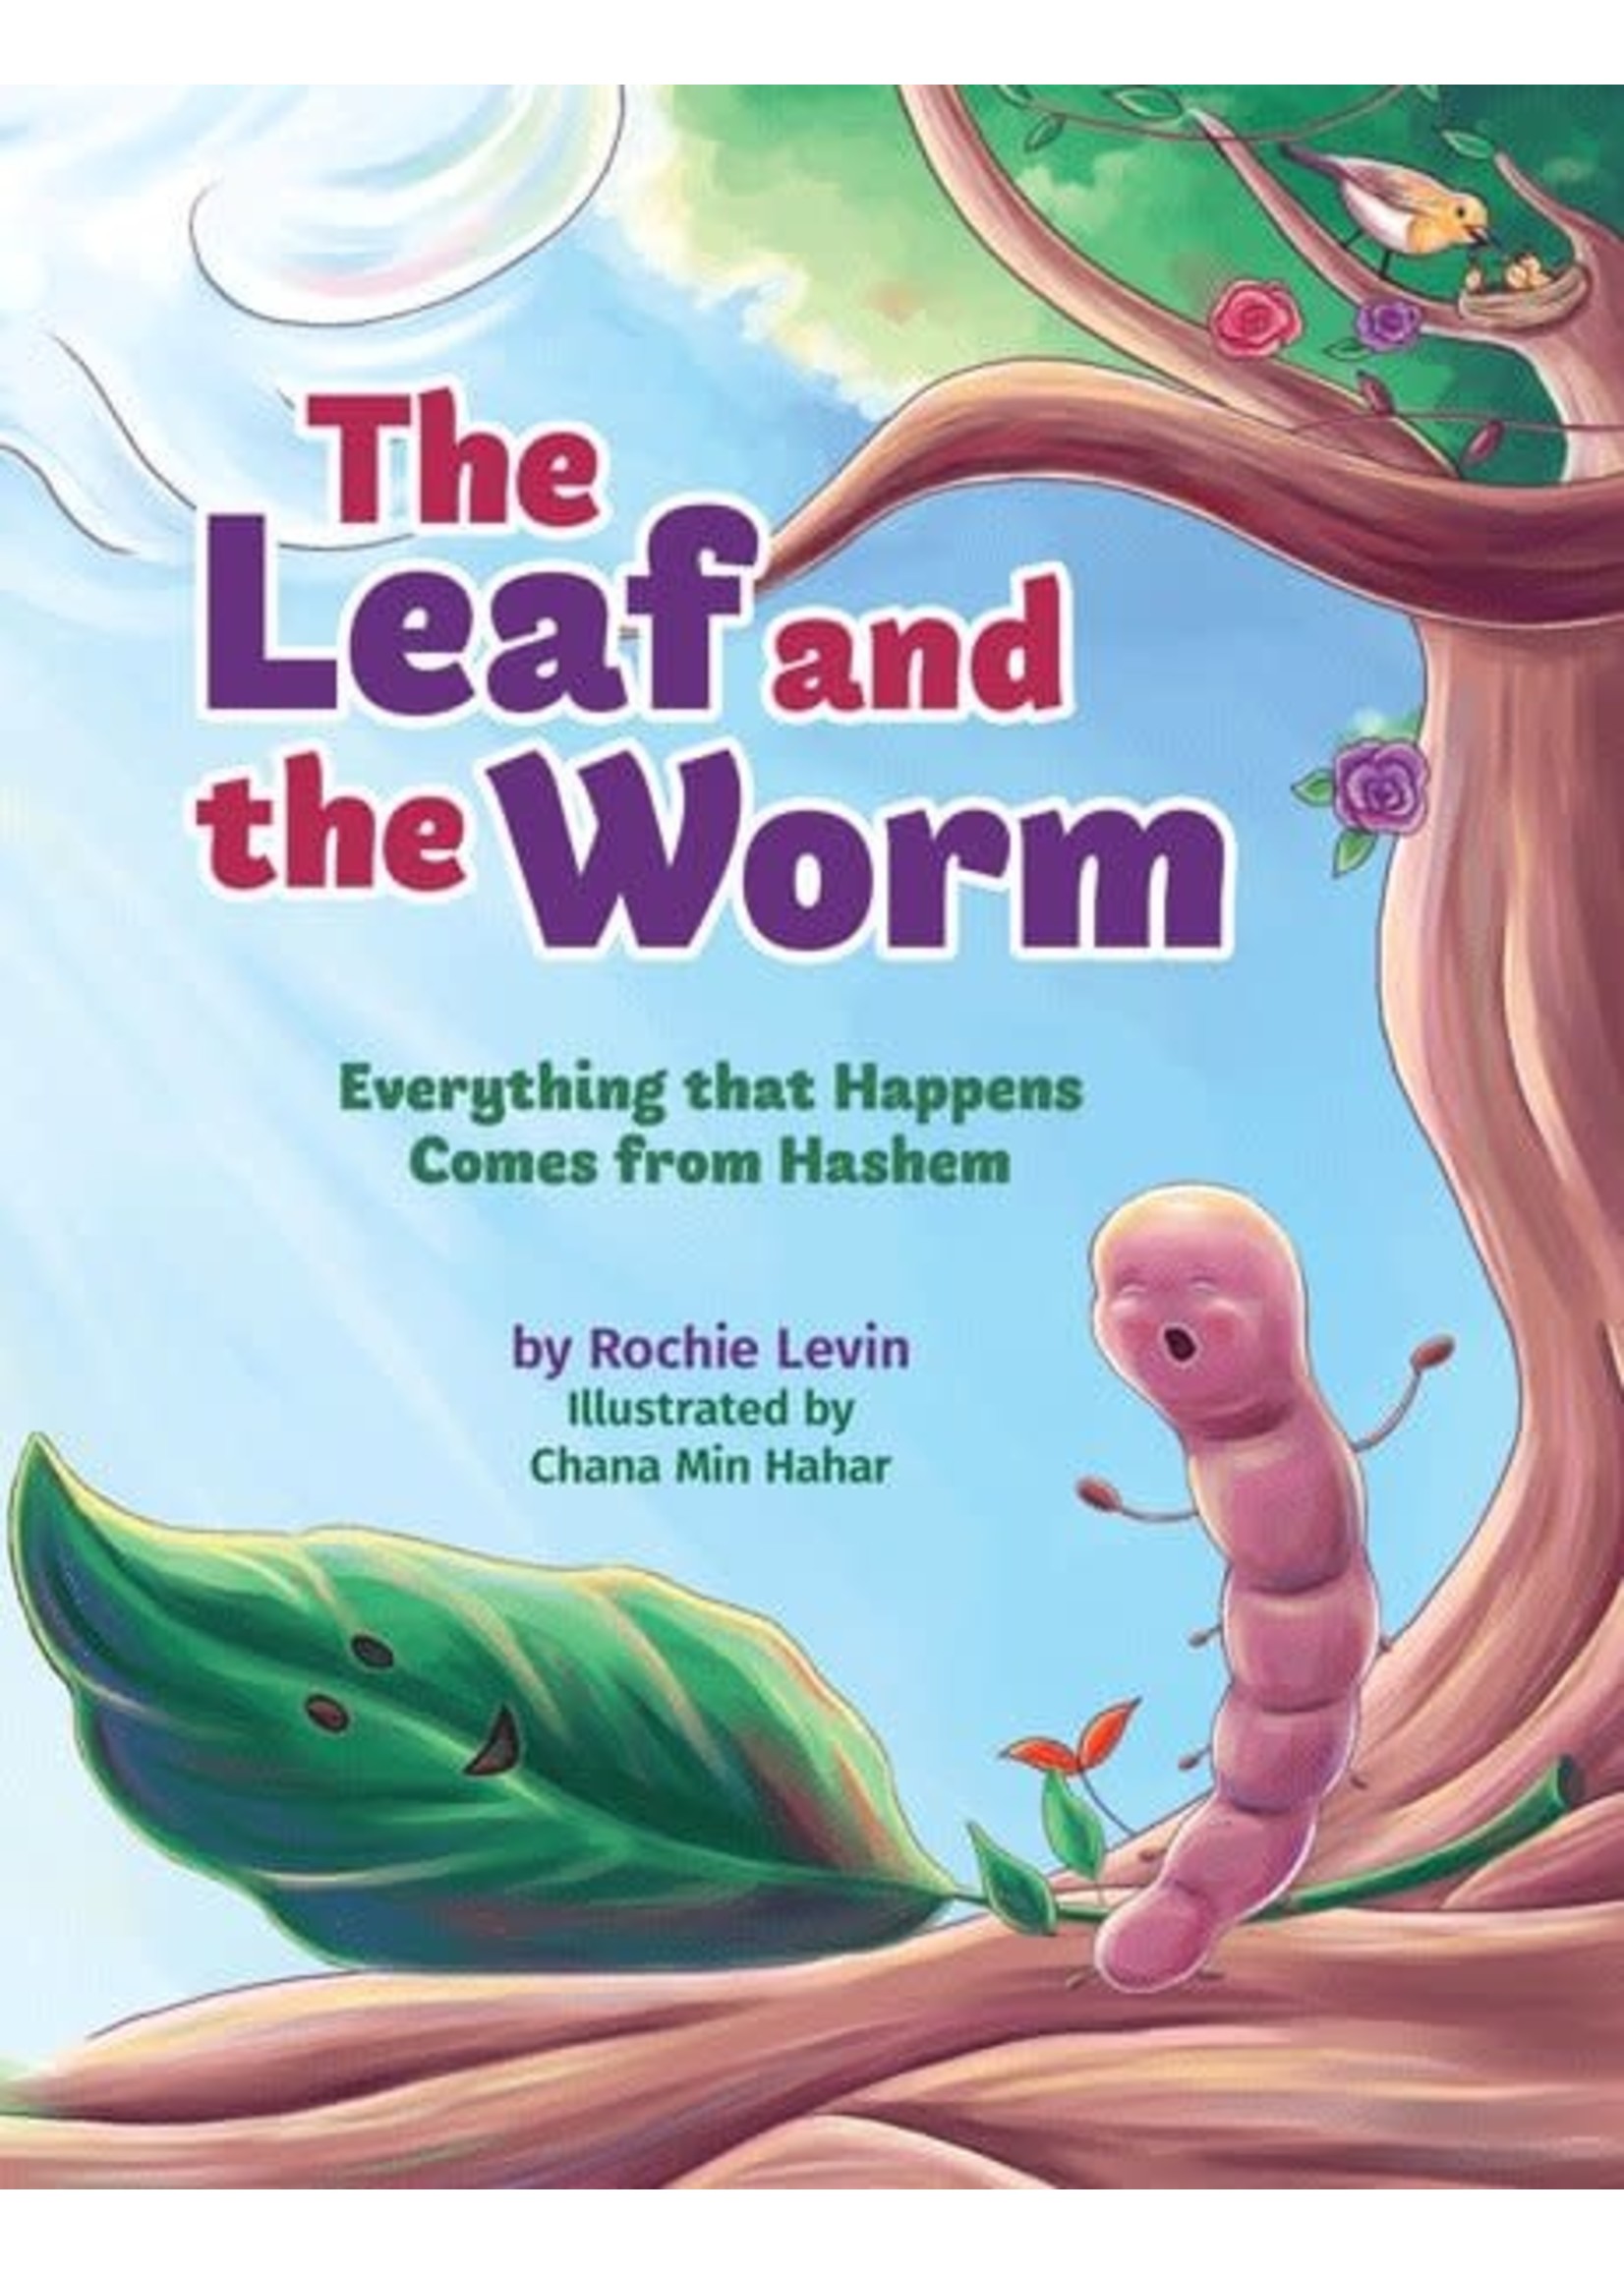 THE LEAF AND THE WORM